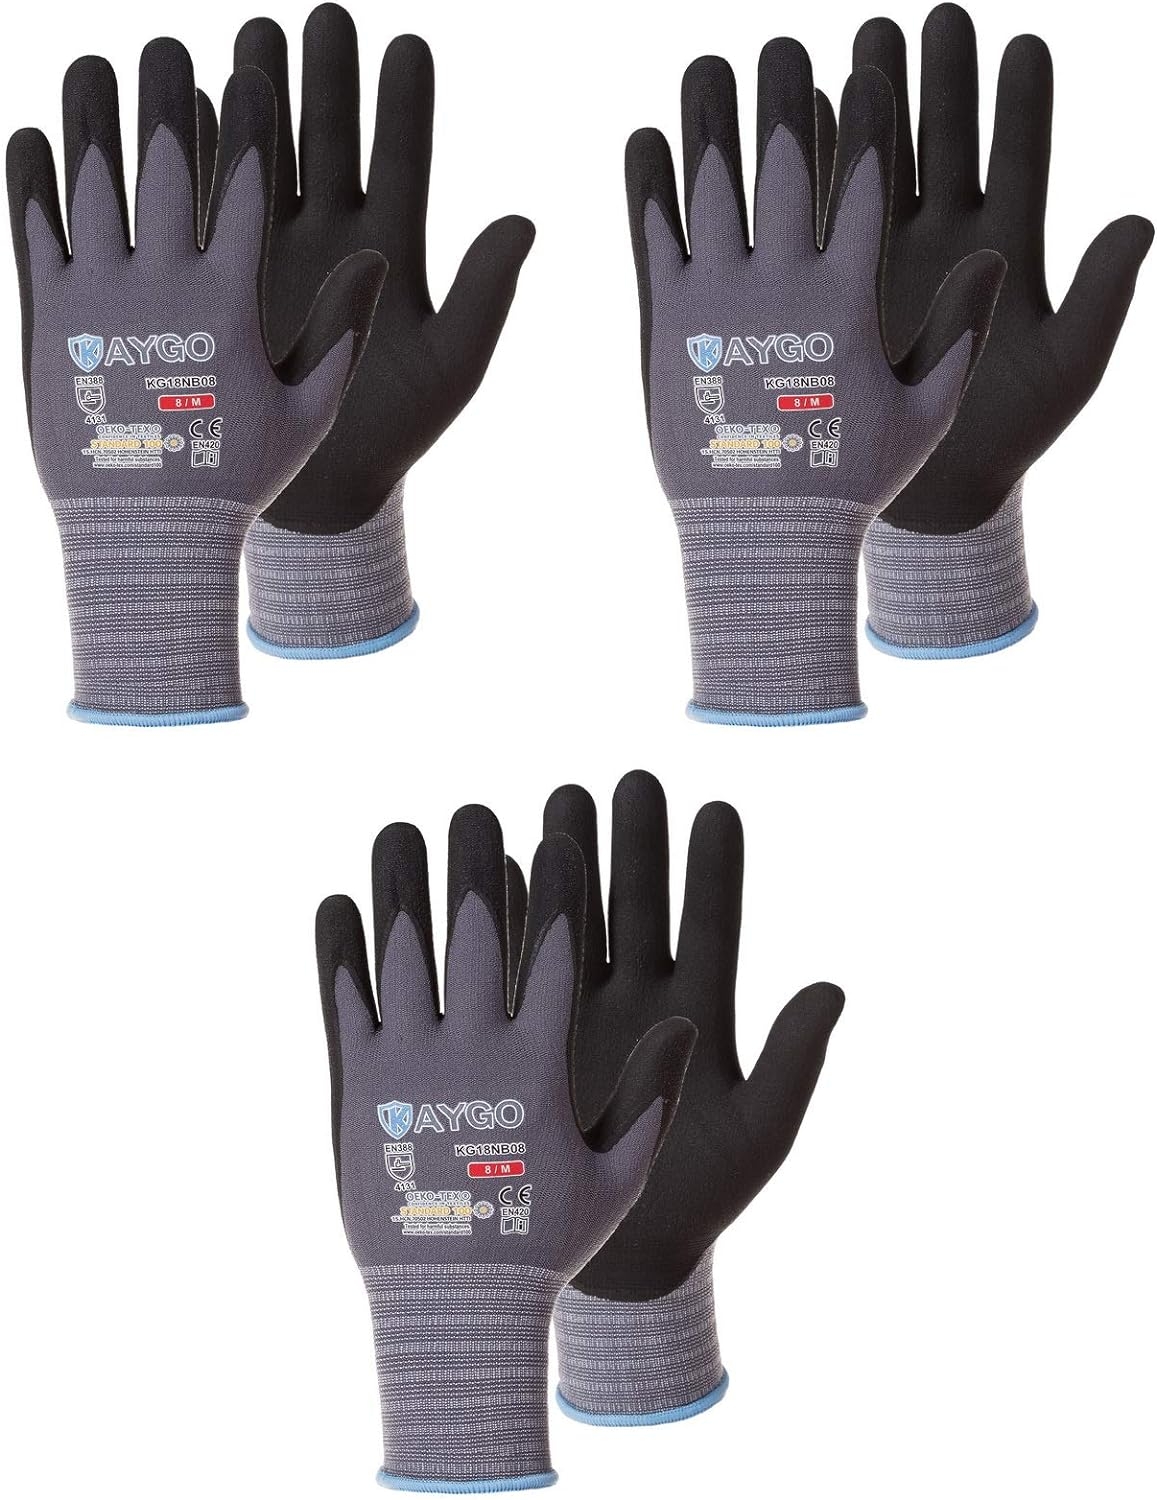 Safety Work Gloves MicroFoam Nitrile Coated-3 Pairs,KAYGO KG18NB,Seamless Knit Nylon Glove with Black Micro-Foam Nitrile Grip,Ideal for General Purpose,Automotive,Home Improvement